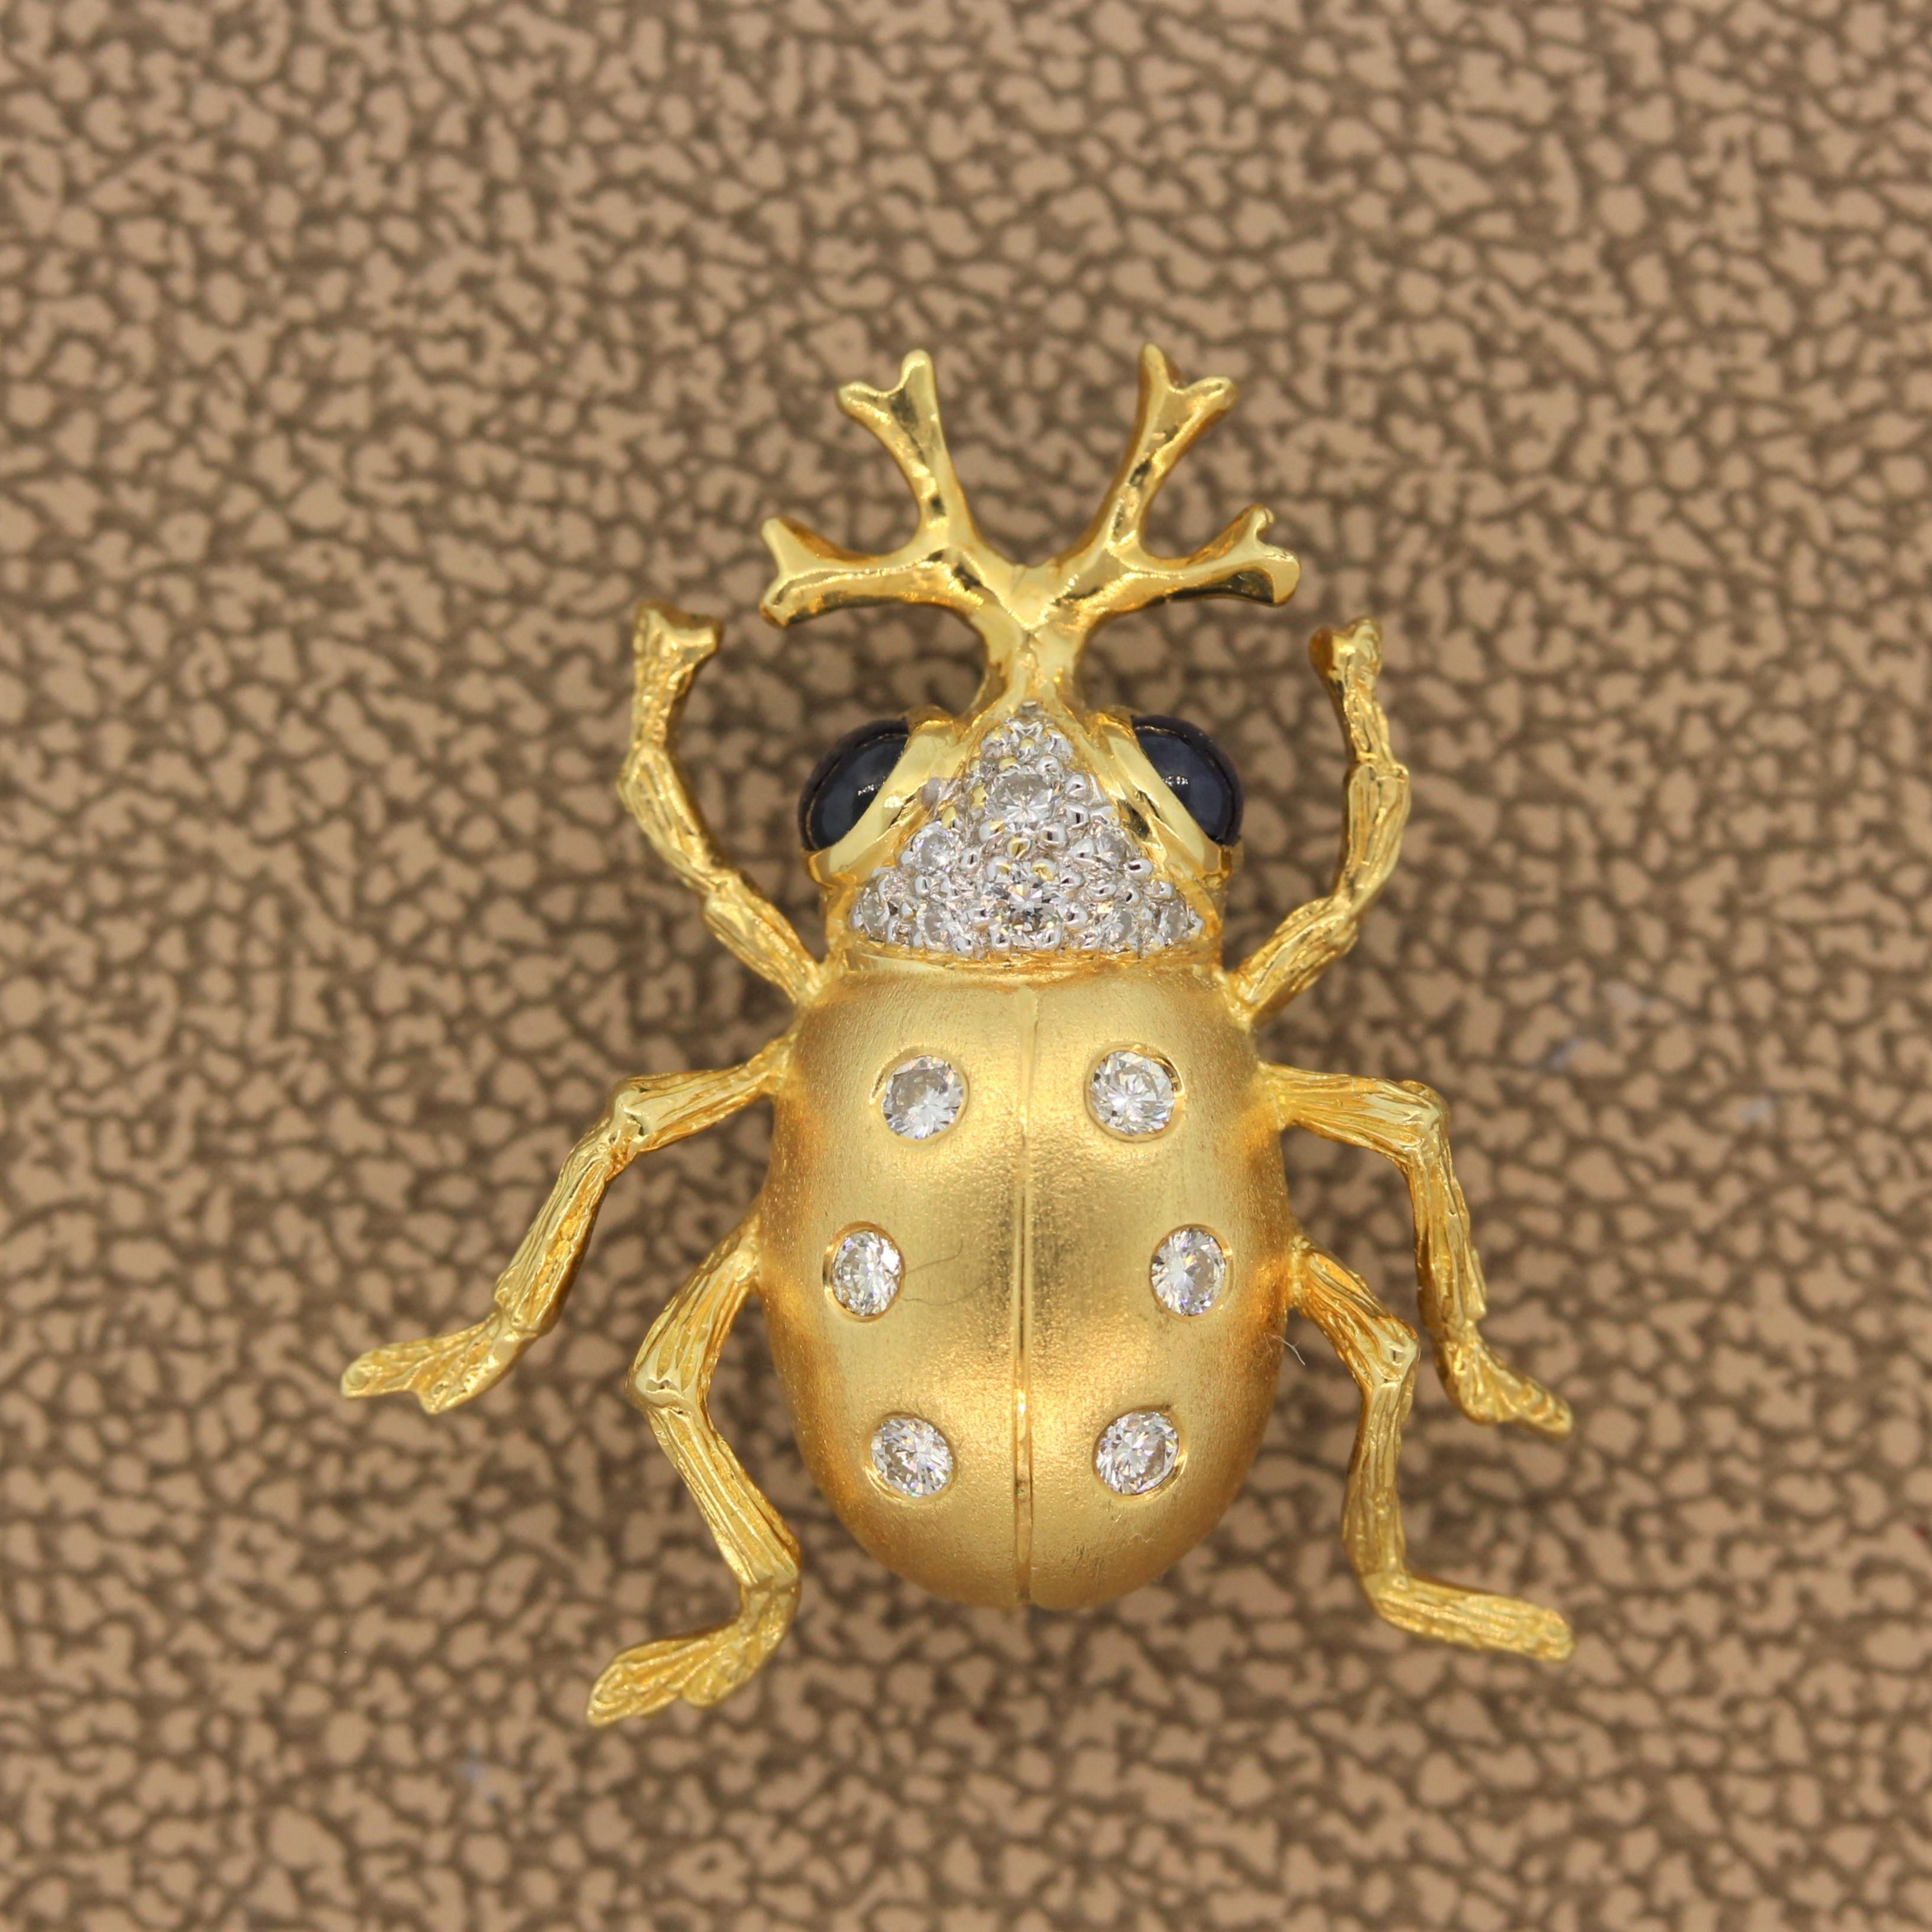 This fast crawling beetle brooch complete with horns features 0.43 carats of blue sapphire cabochon eyes. The 18K yellow gold body is polka dotted with 0.25 carats of sparkling colorless round cut diamonds.

Brooch Length: 1.00 inch
Brooch Width: